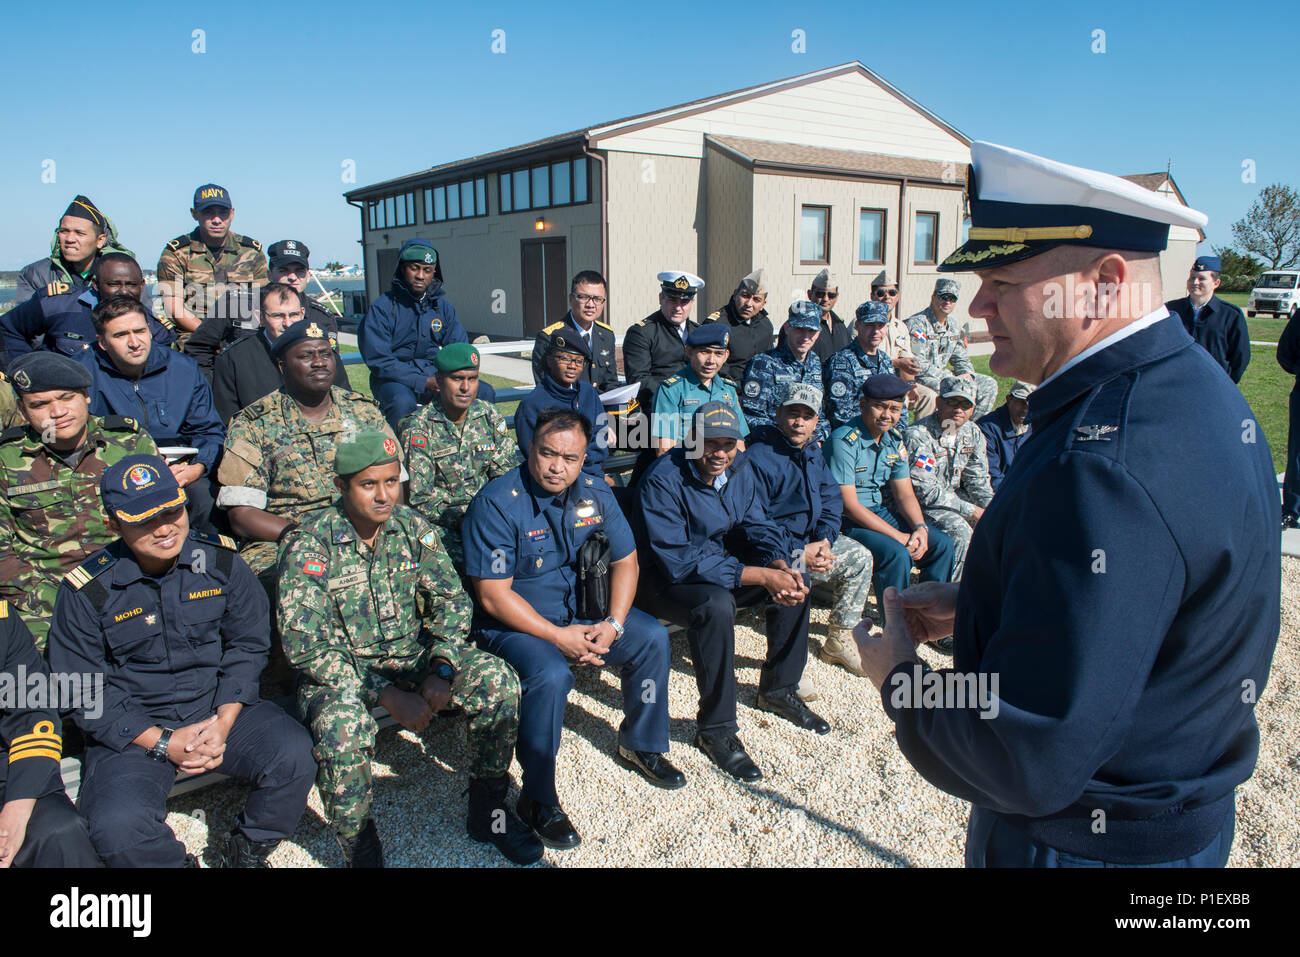 Captain Owen Gibbons, commanding officer of Coast Guard Training Center Cape May, N.J., speaks to members of foreign military during their visit to the training center, Monday, Oct. 24, 2016. The group is participating in an international training opportunity designed to familiarize foreign military members with the Coast Guard as well as to learn about American history and culture. Twenty-seven countries have members participating in this class. (U.S. Coast Guard photo by Chief Warrant Officer John Edwards/Released) Stock Photo